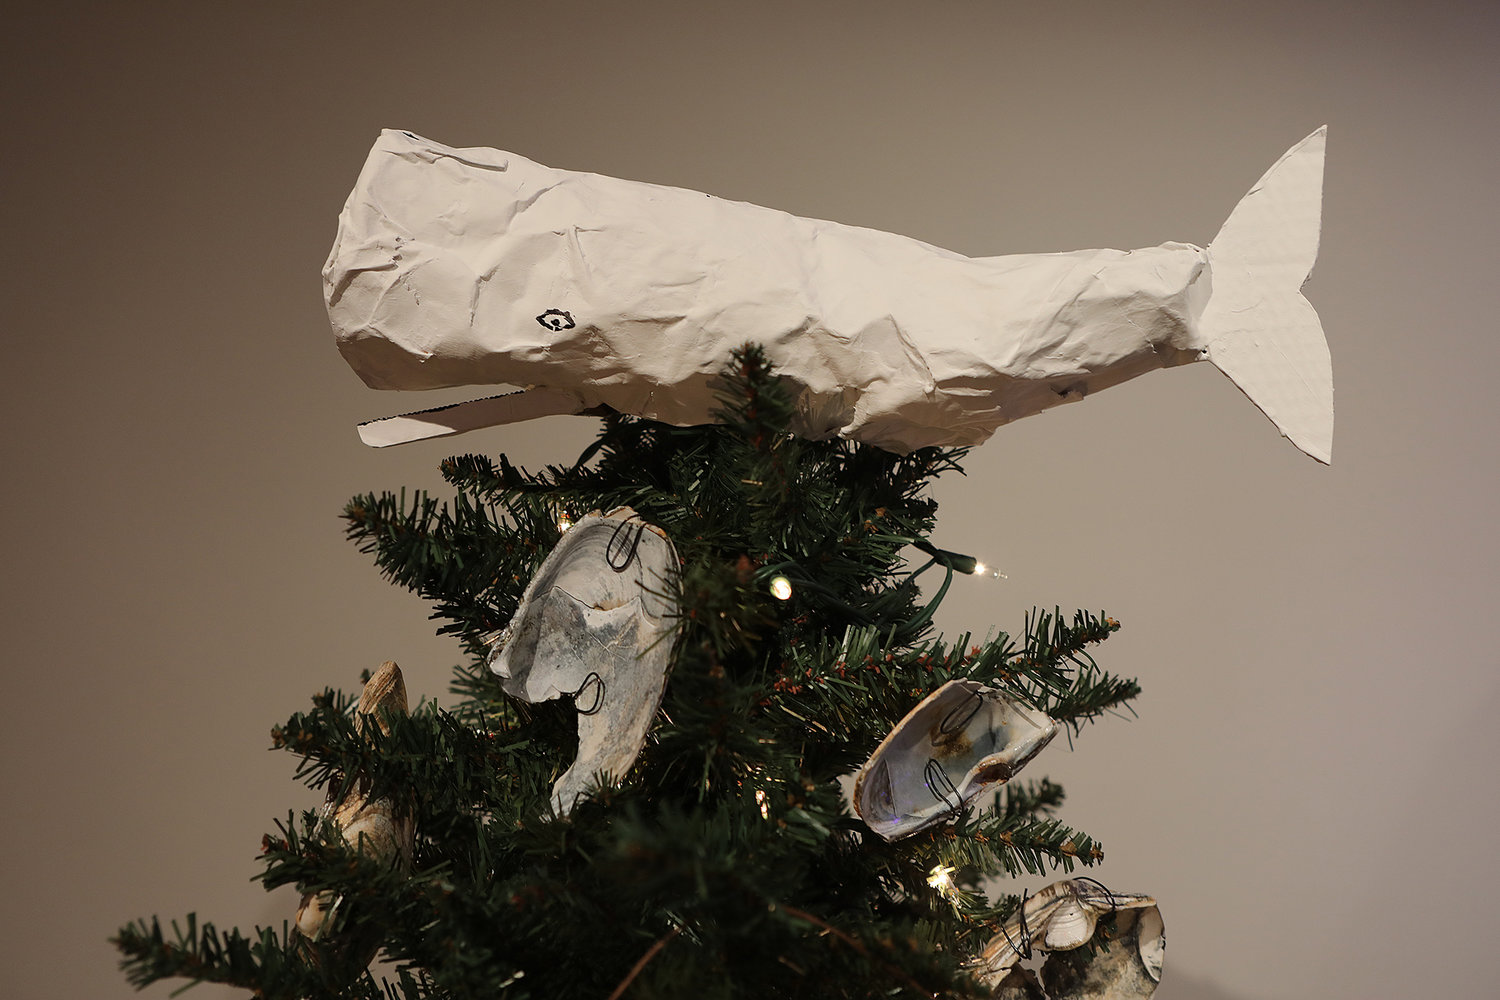 A white whale atop the Monica Seggos "Washashore" tree. Nantucket Historical Association Festival of Trees at the Whaling Museum.